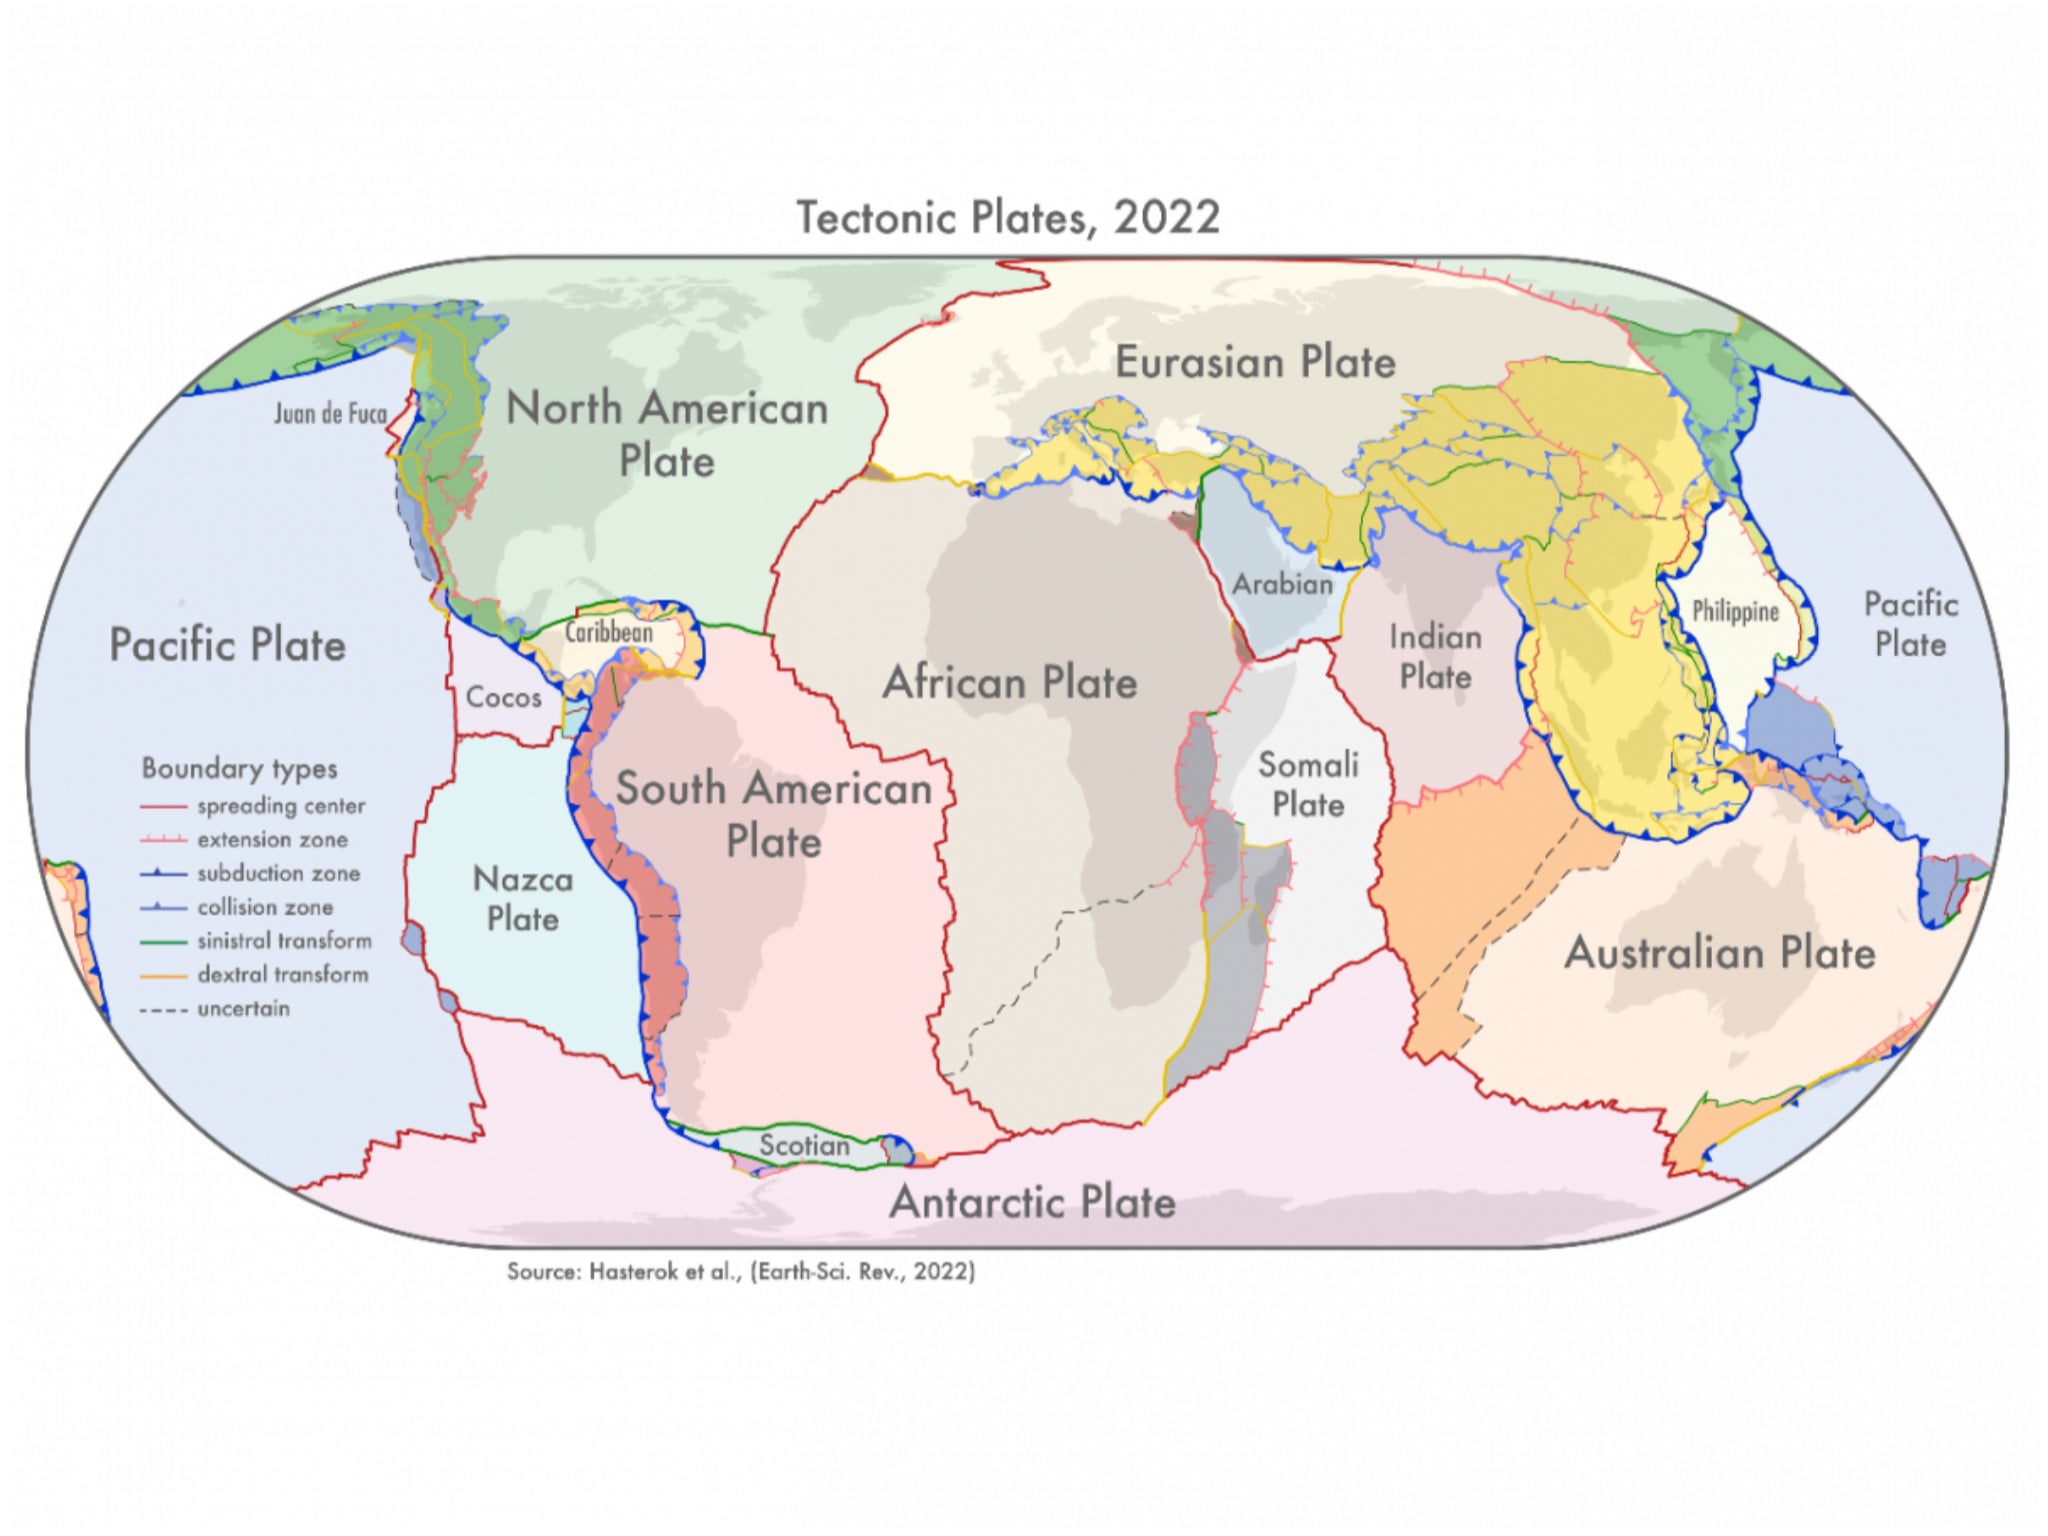 Scientists have created a new model of the Earth’s tectonic plates